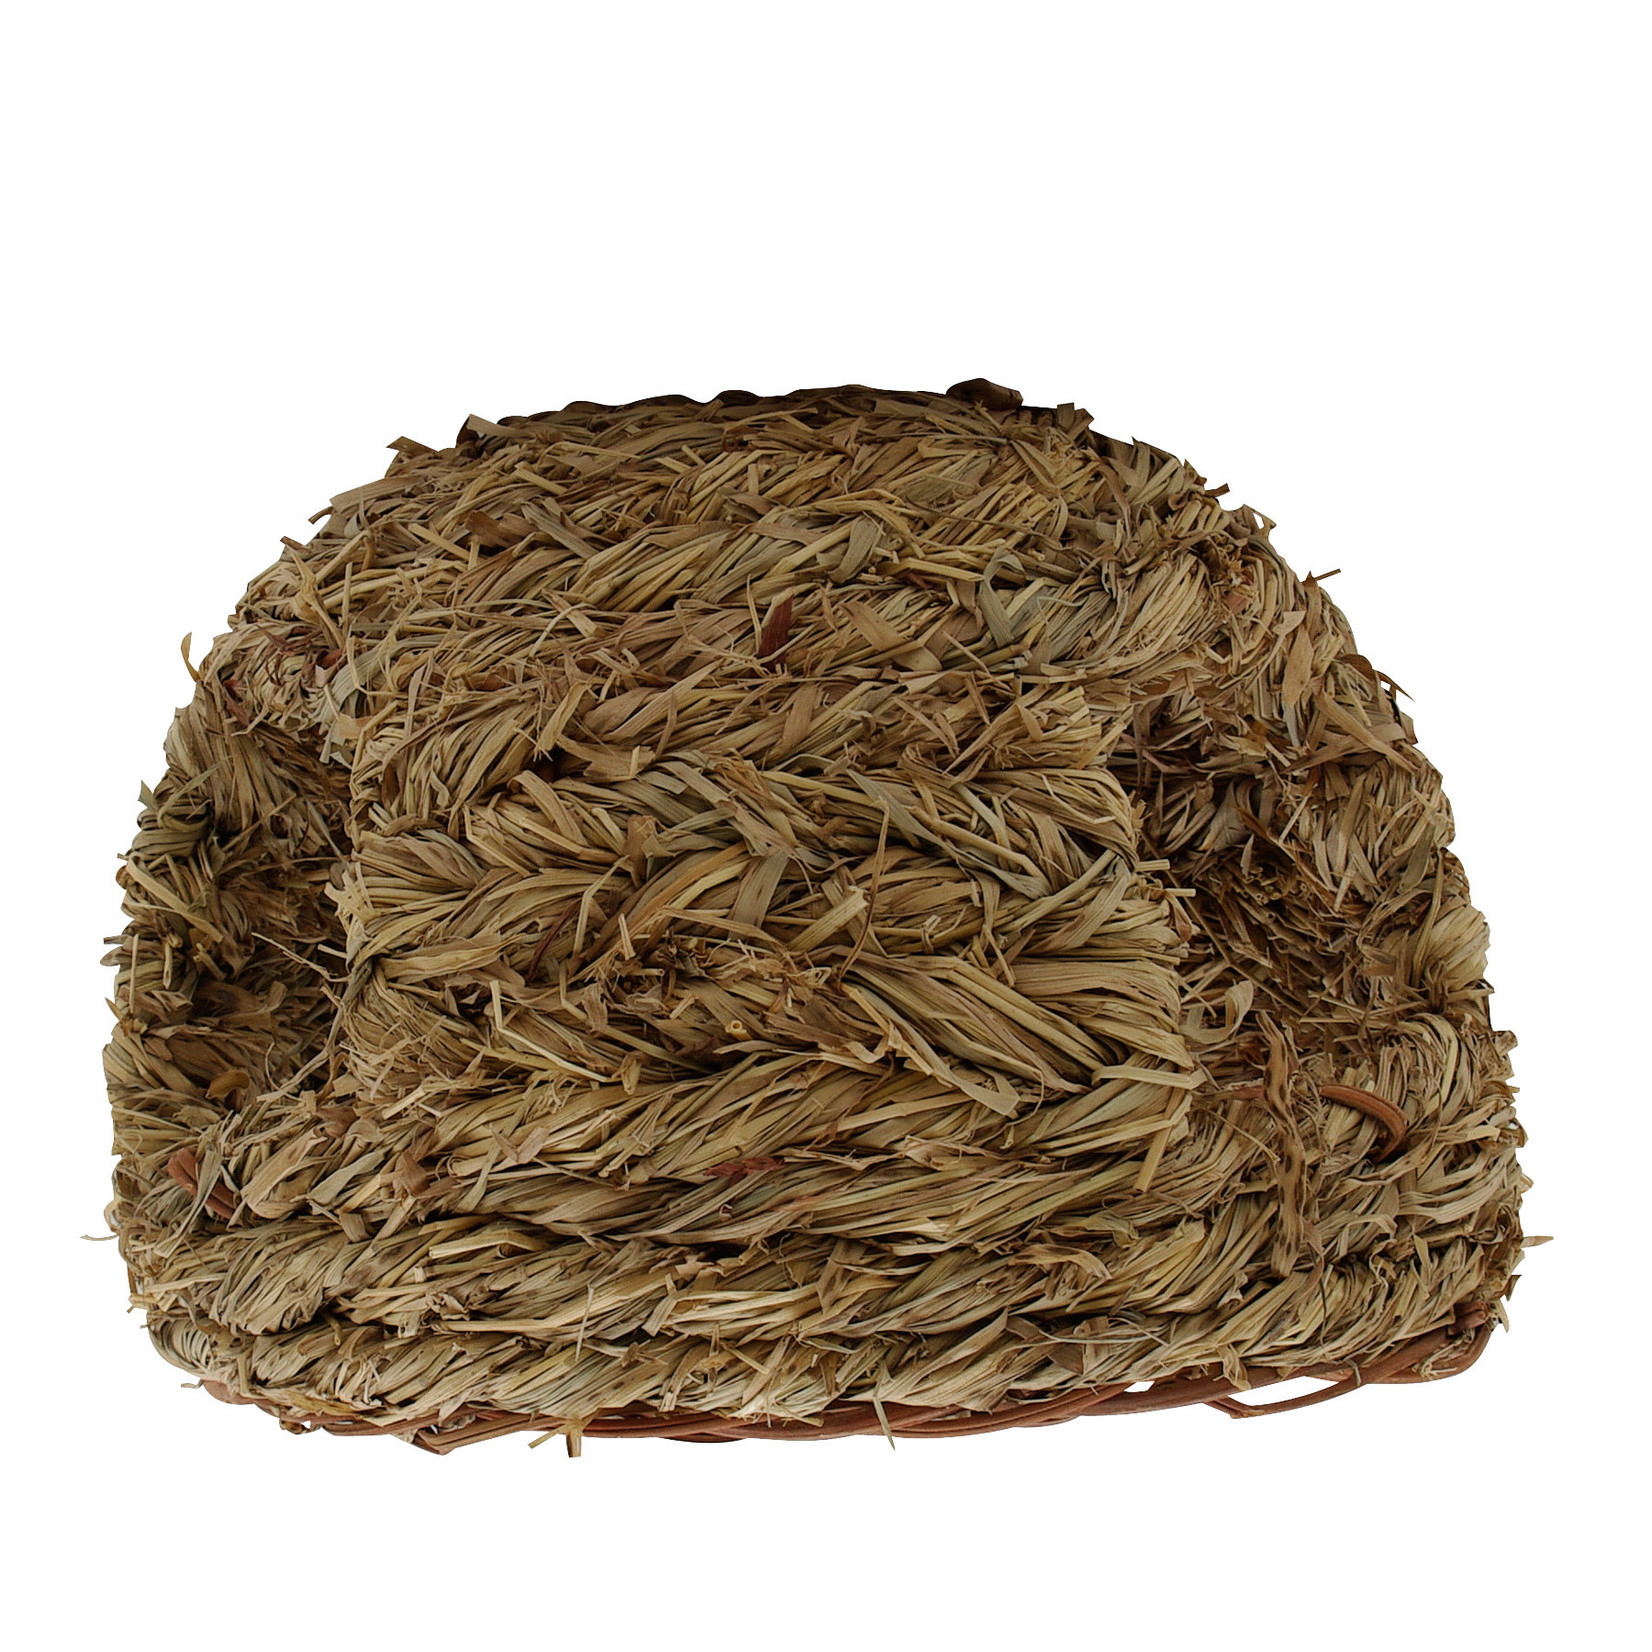 LIVING WORLD (D) Living World Small Animal Nest - Orchard Grass - Large - Round